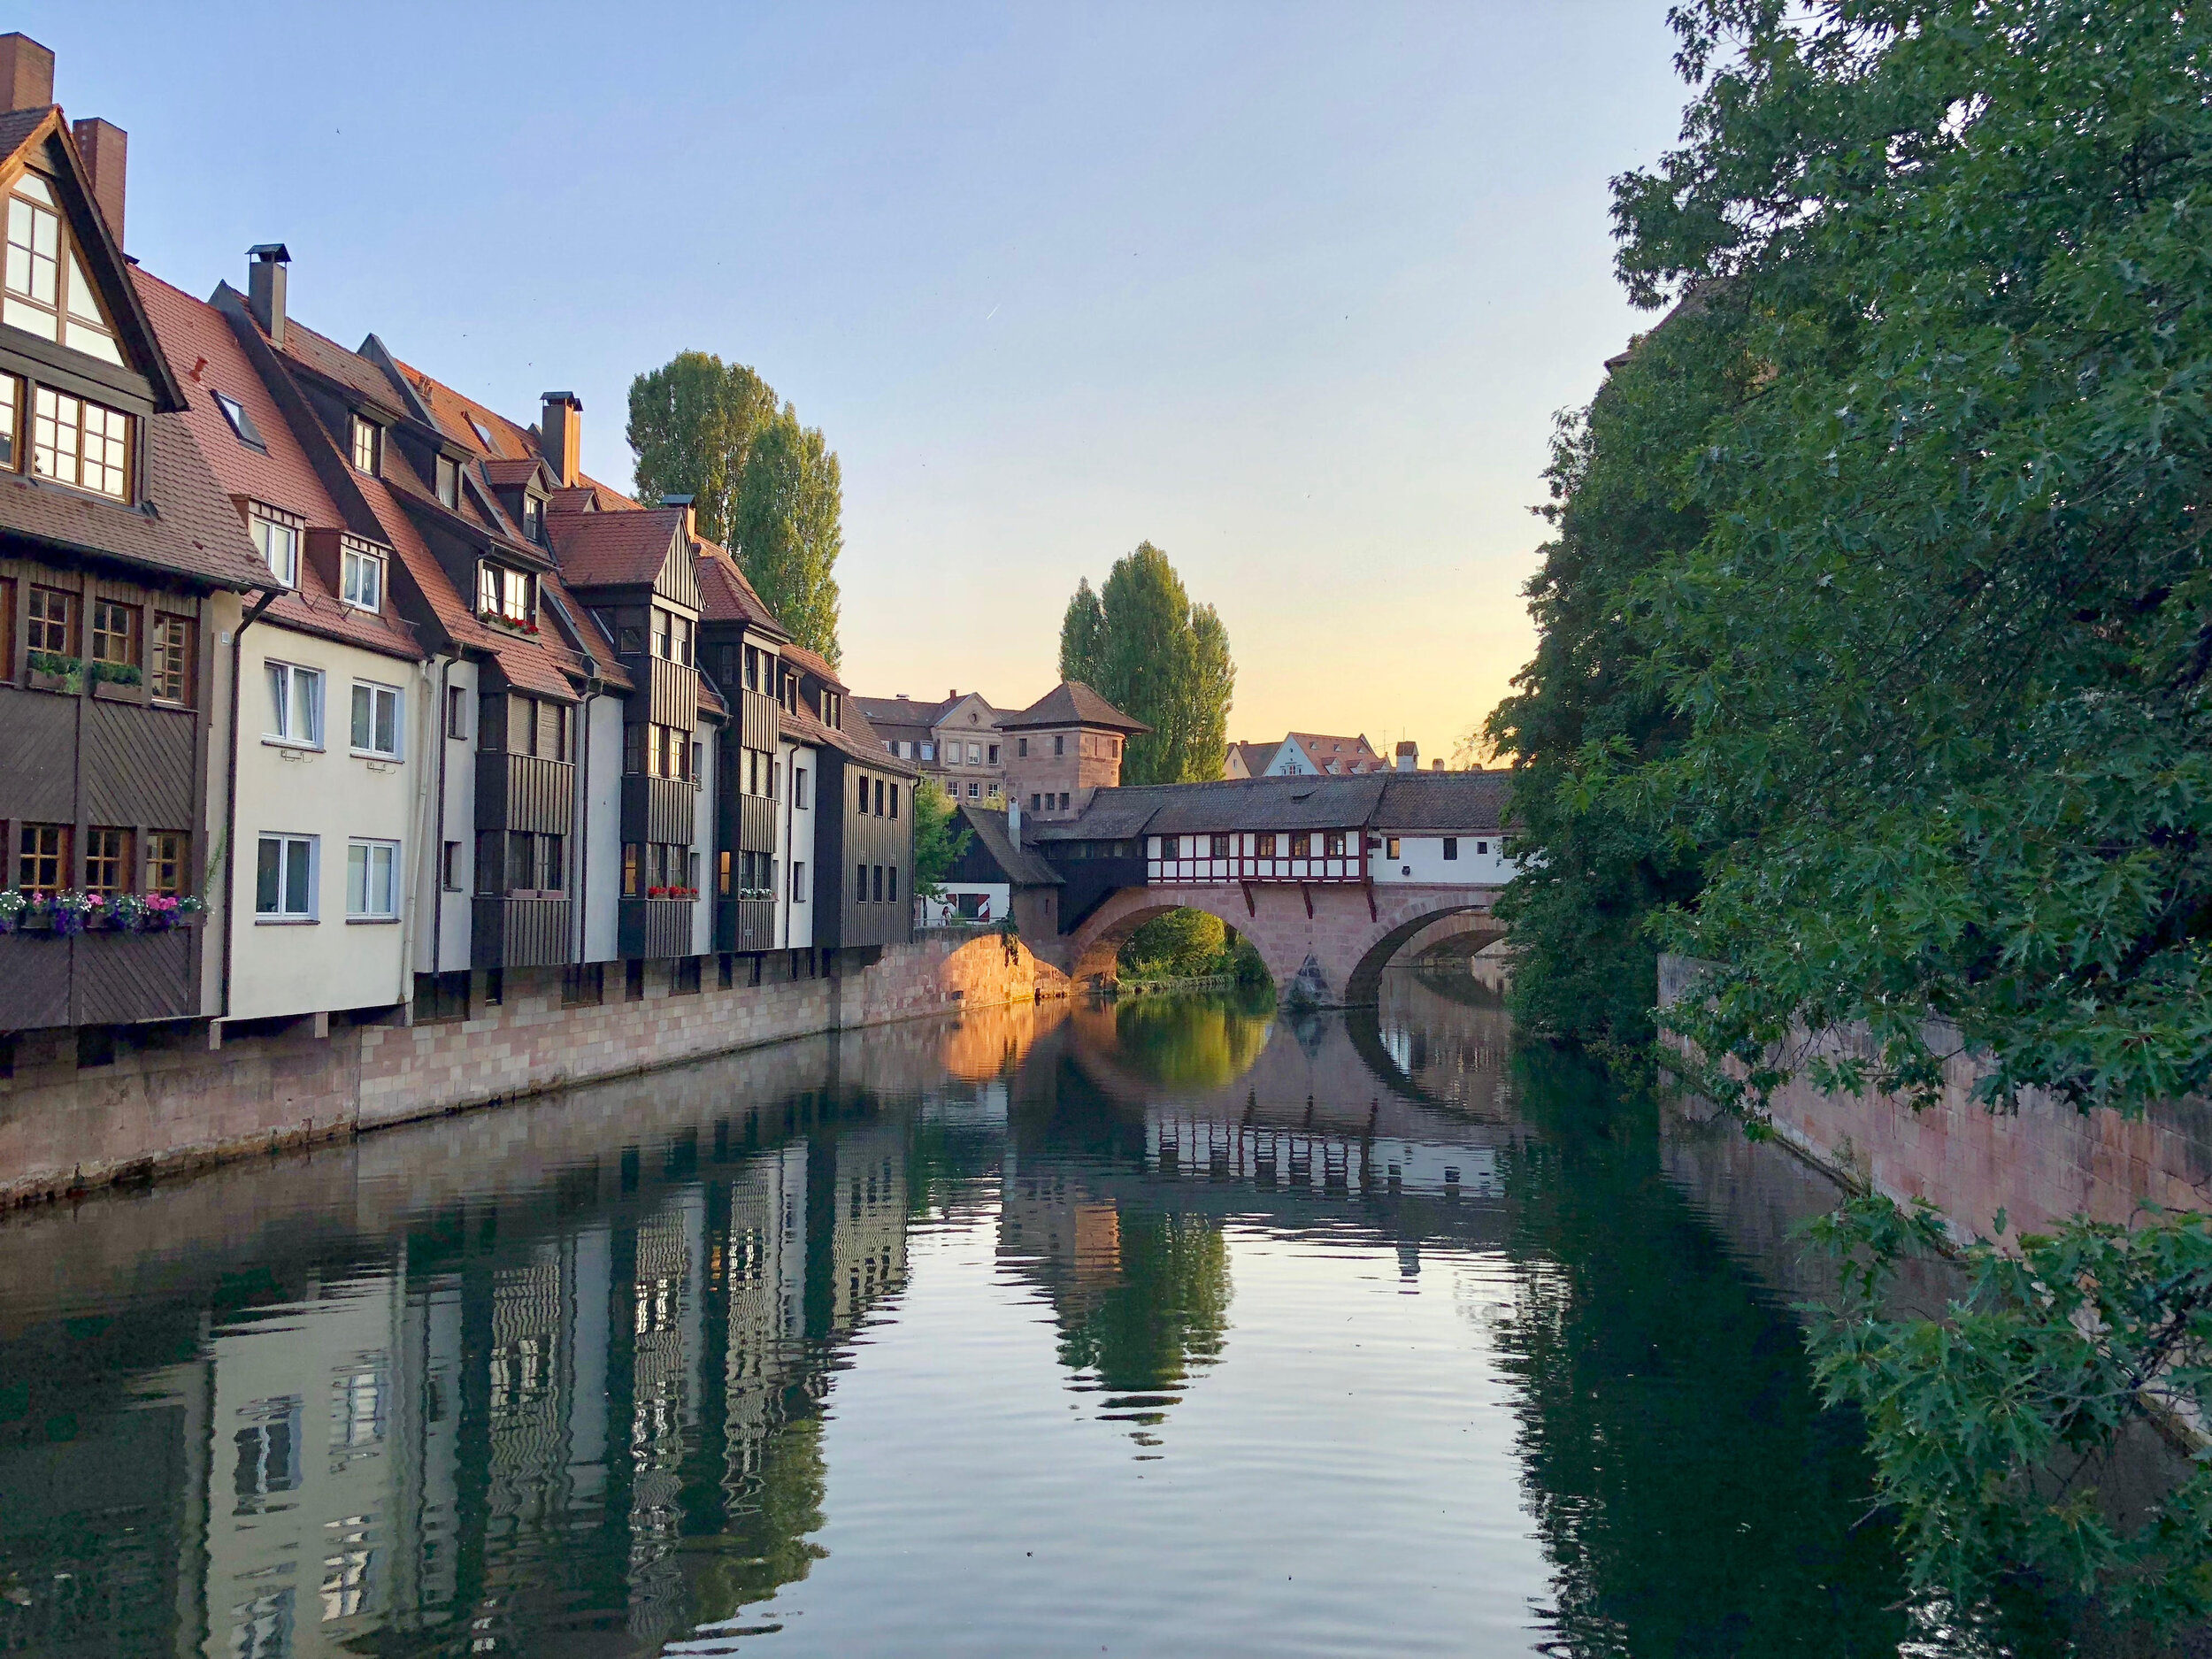 Sightseeing, Shopping and Dining in Nuremberg